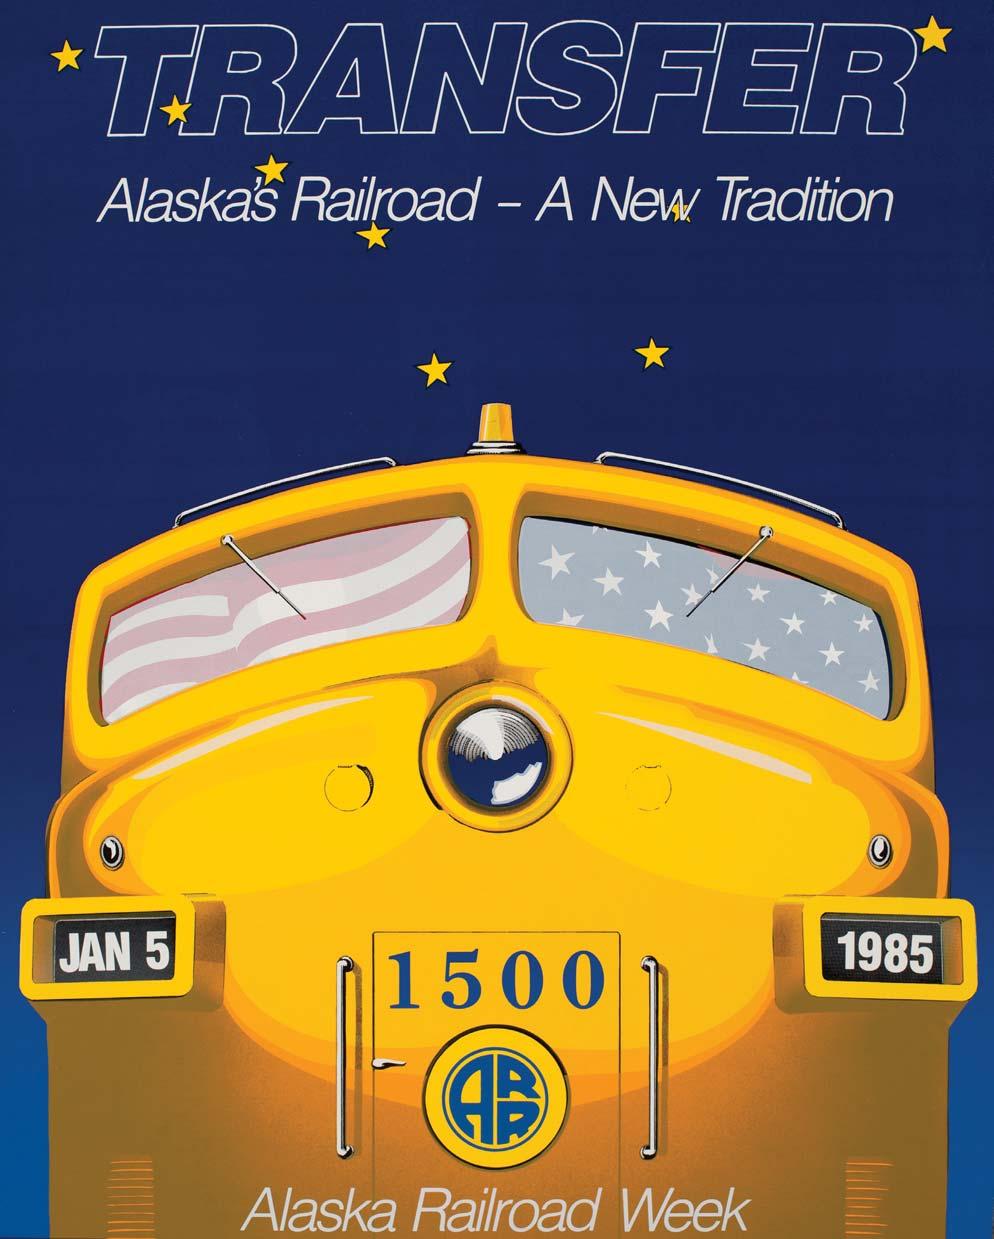 John Hume was the artist of the 1985 poster that celebrates the Transfer 1985 of the Railroad from Federal to State